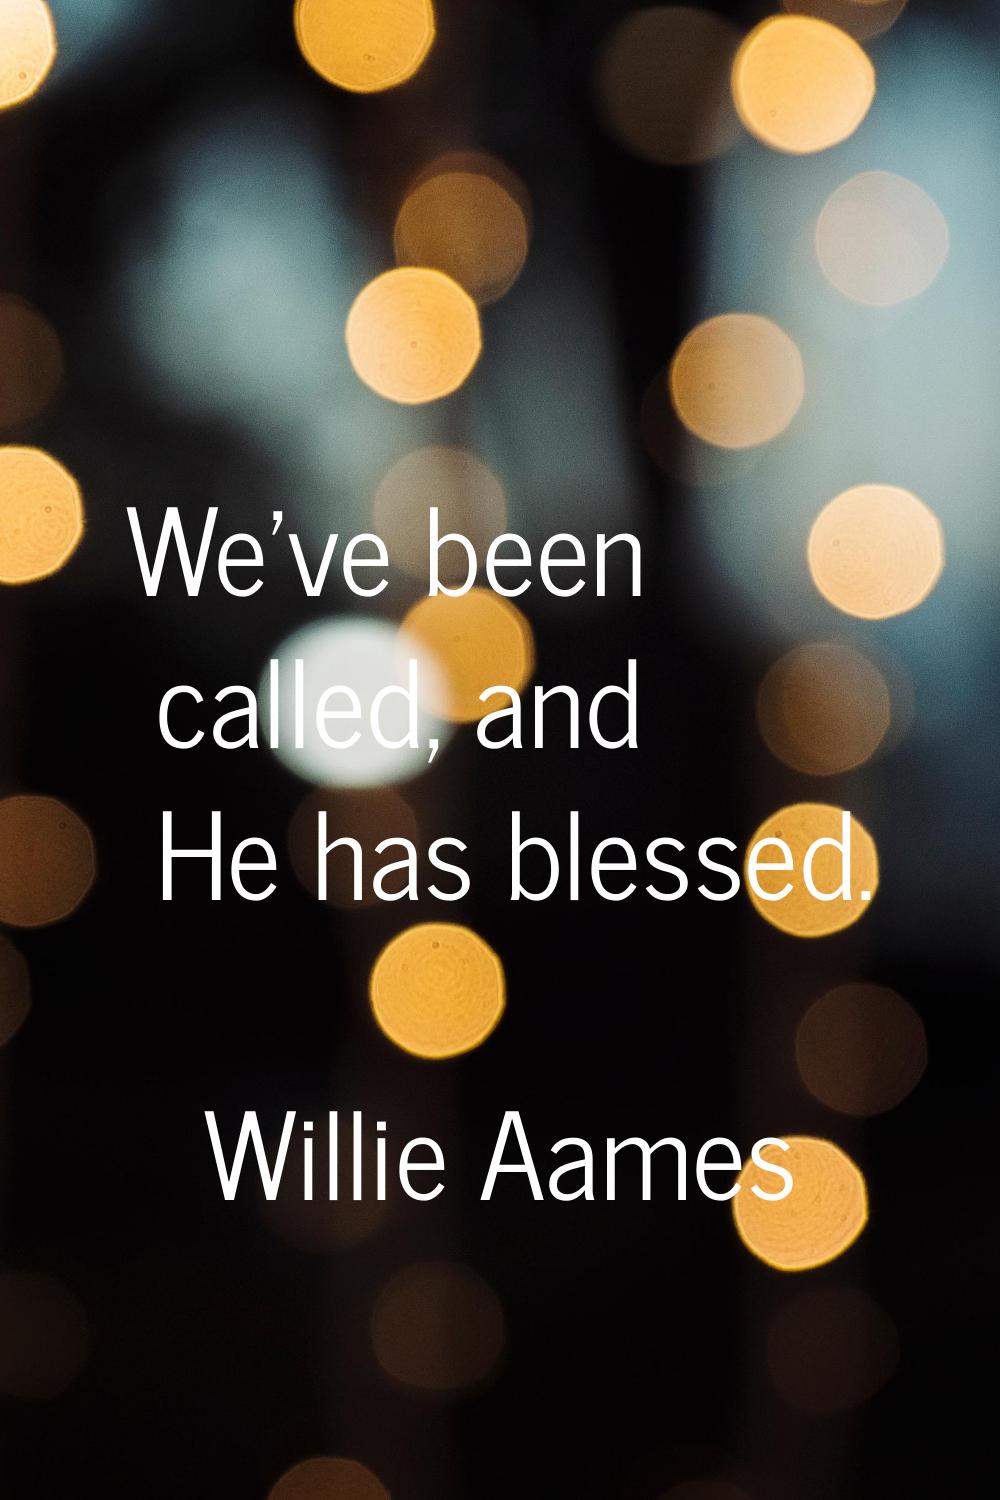 We've been called, and He has blessed.